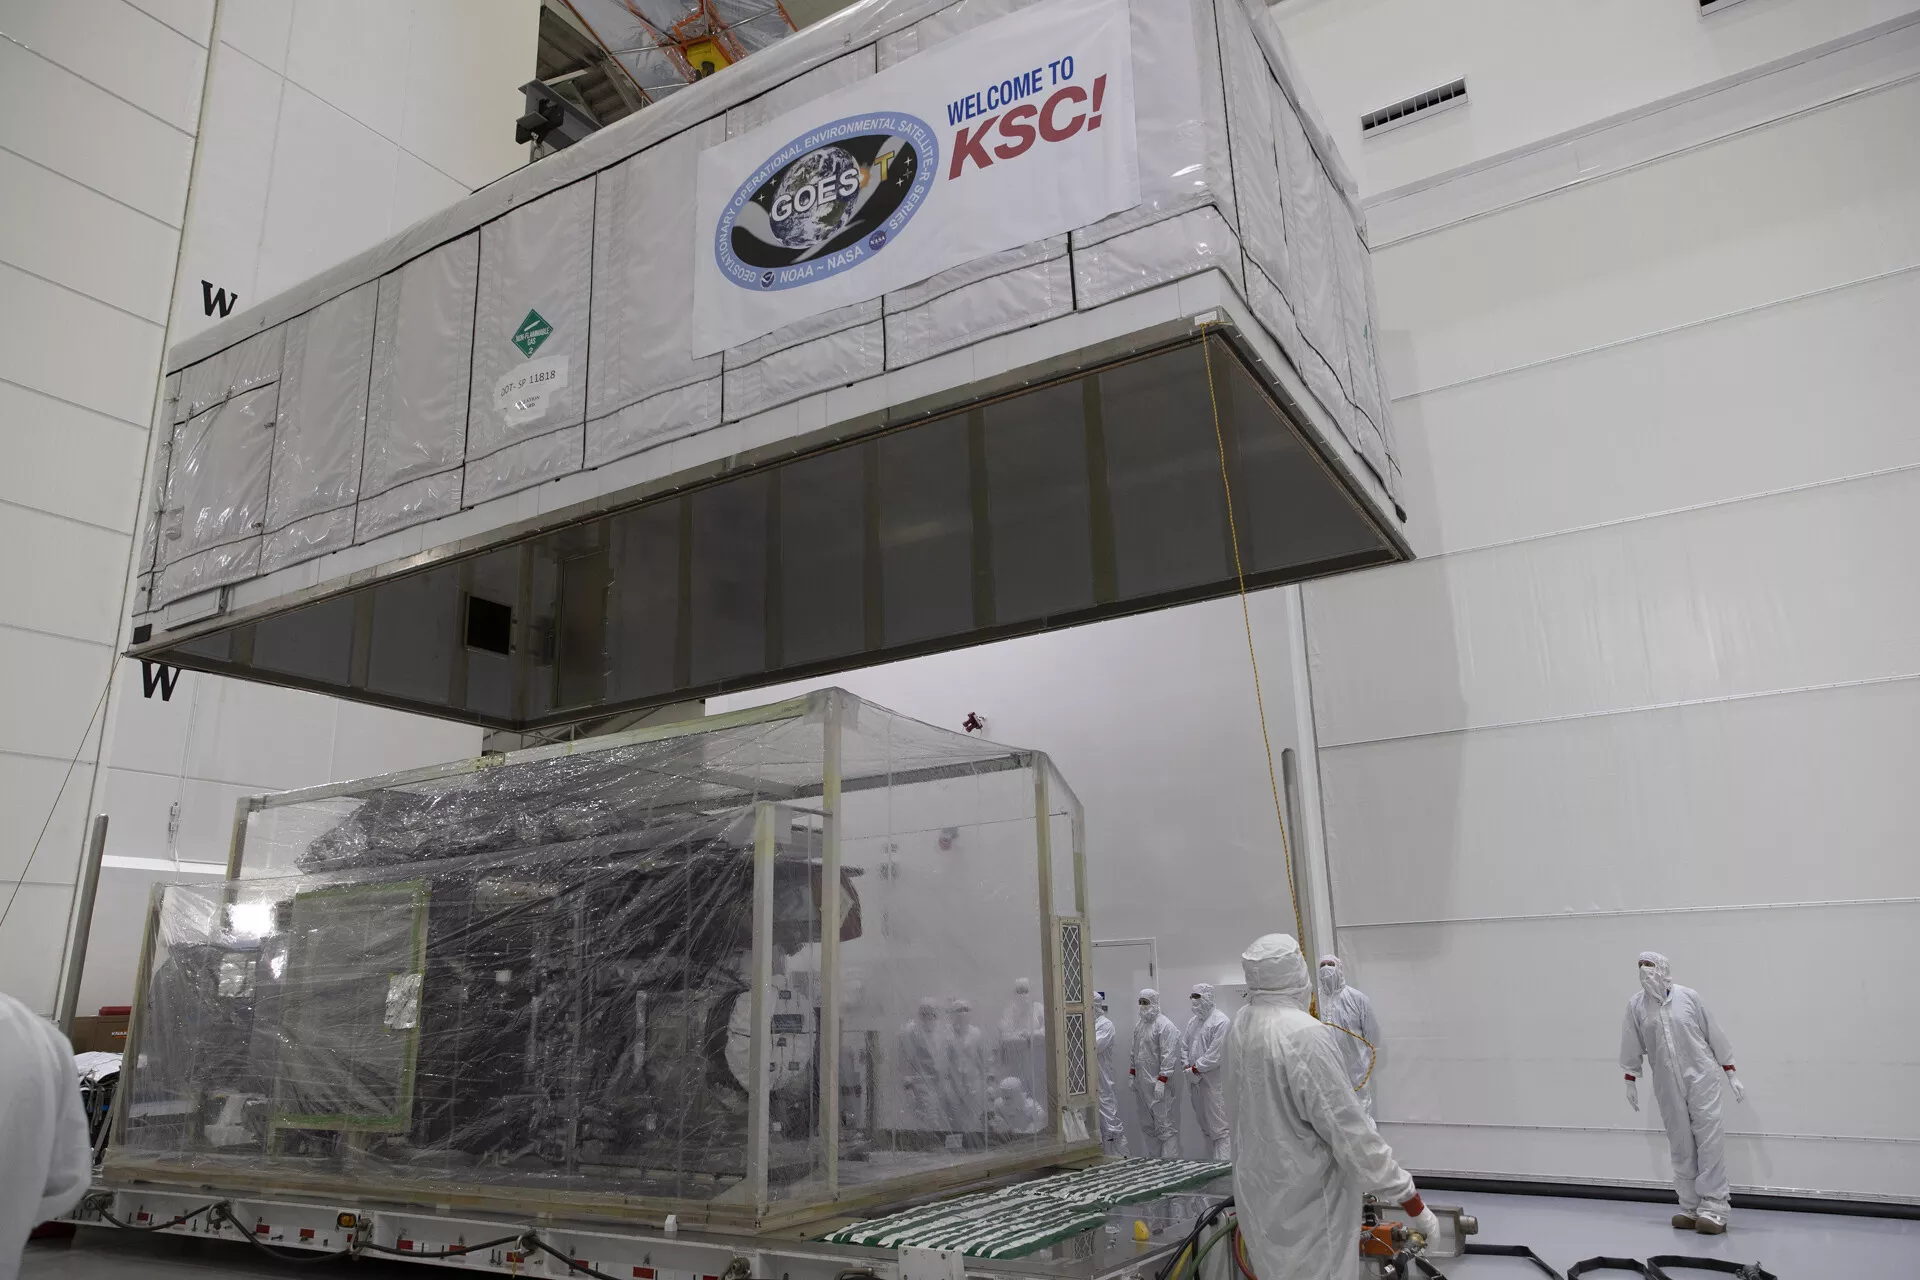 Image of a large box the size of bus containing the GOES-T satellite.